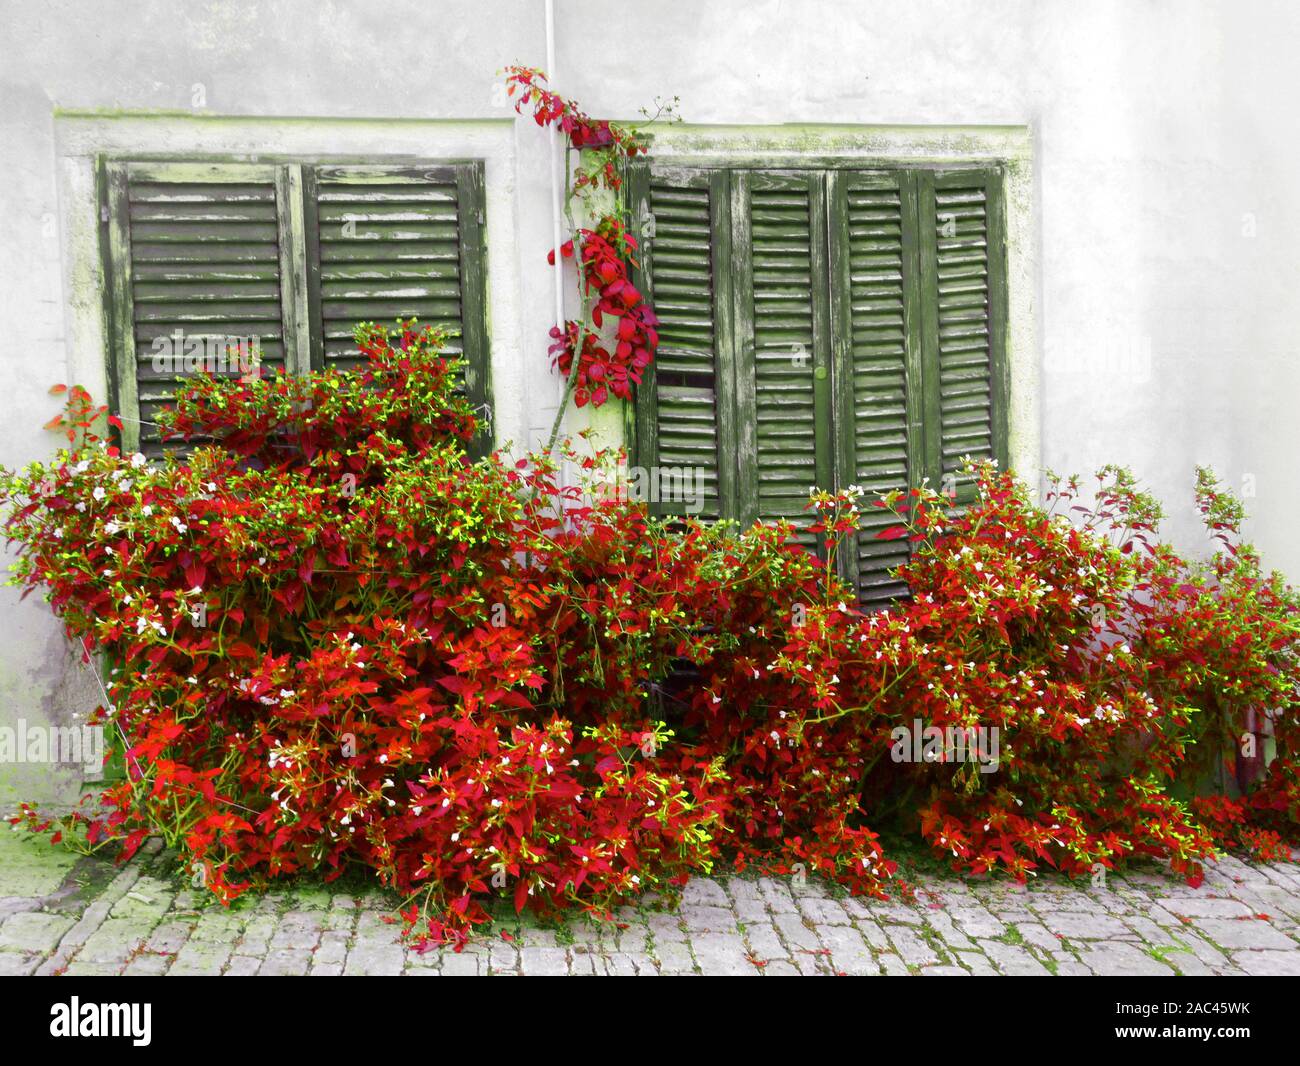 Rustic Wooden Window Shutters with With Shrubs Growing Around it. Stock Photo